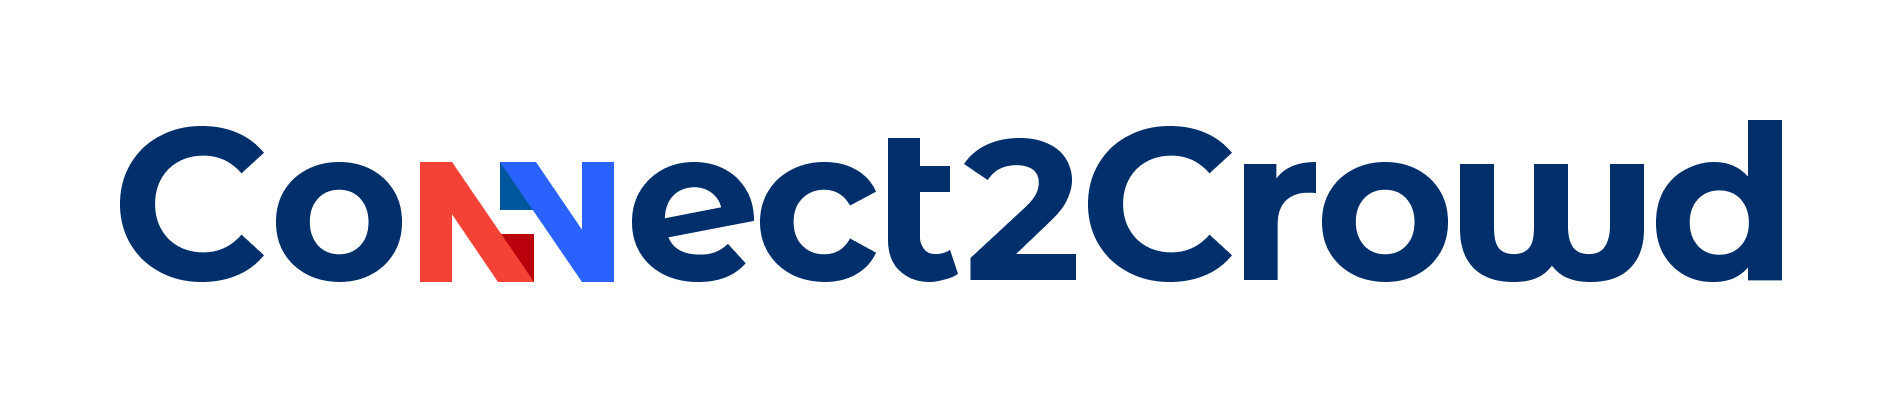 Connect2Crowd logo